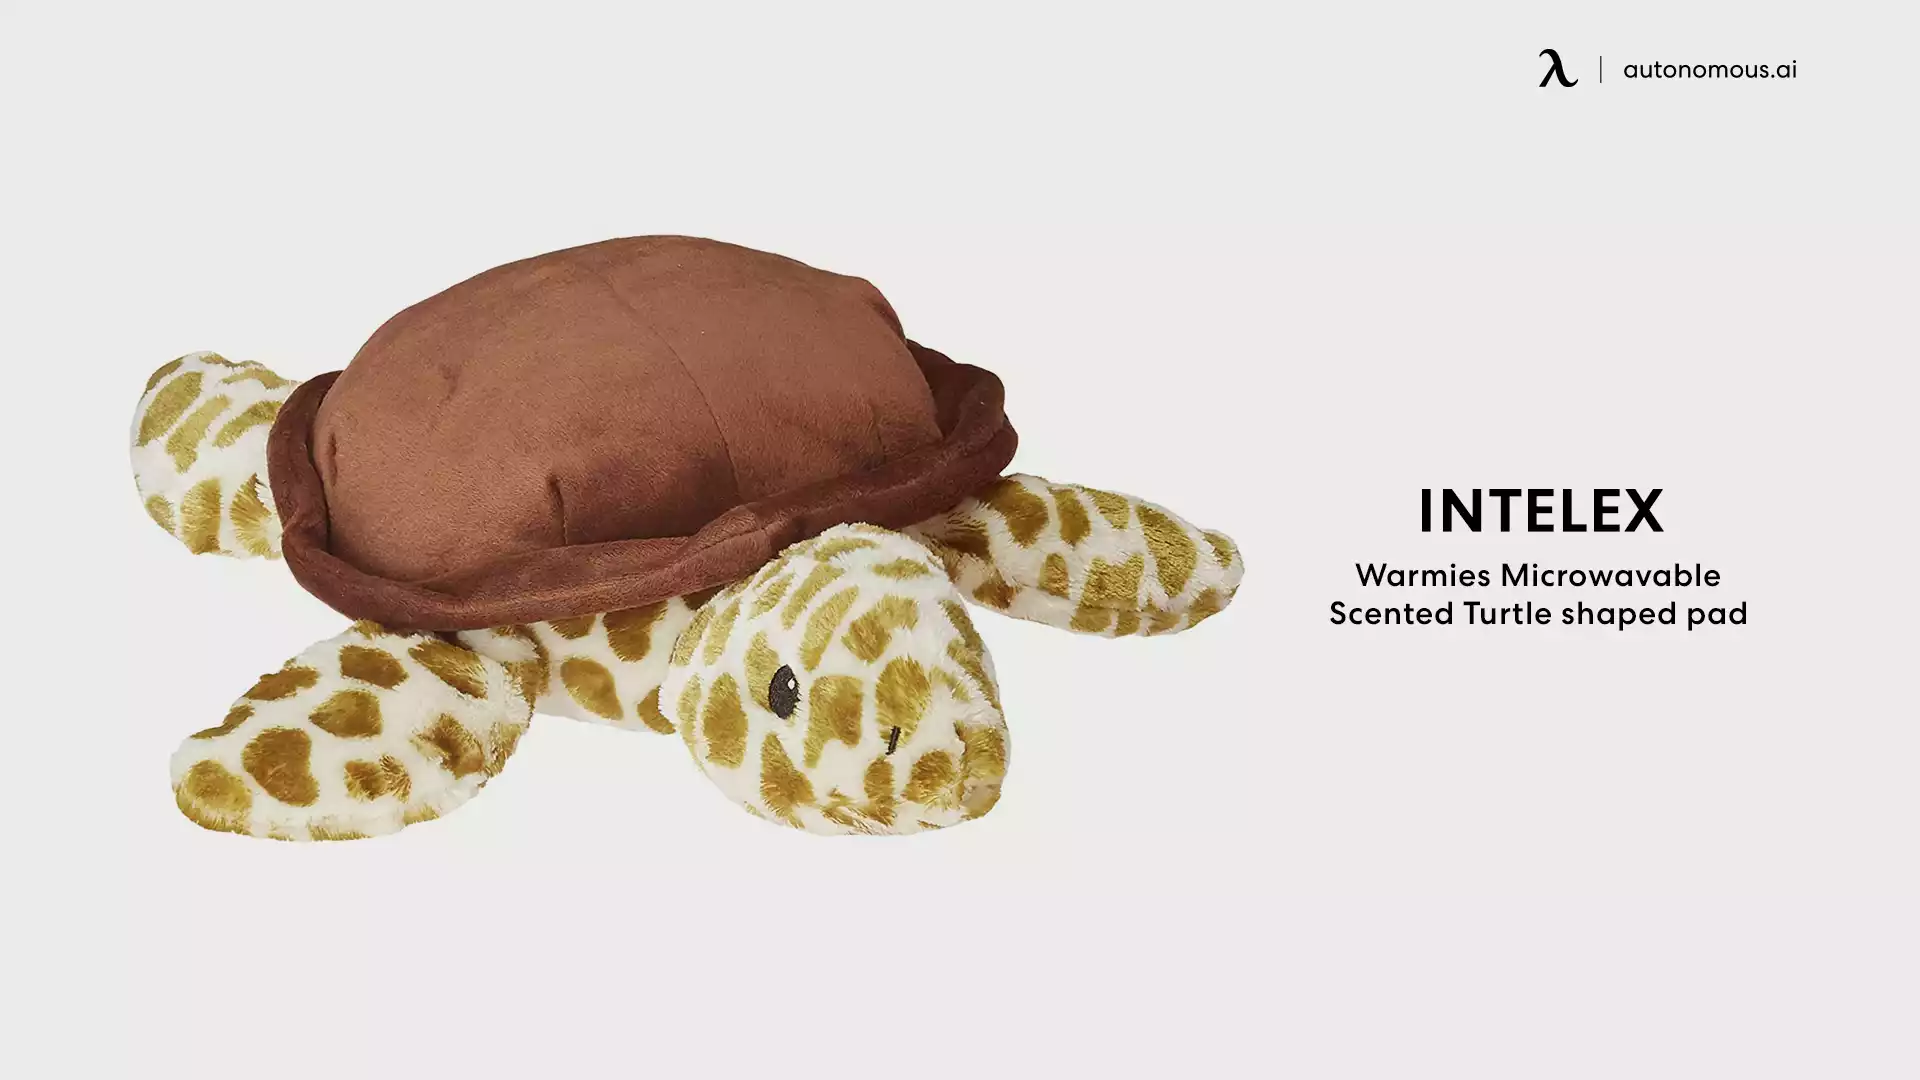 Warmies Microwavable Scented Turtle shaped pad from Intelex